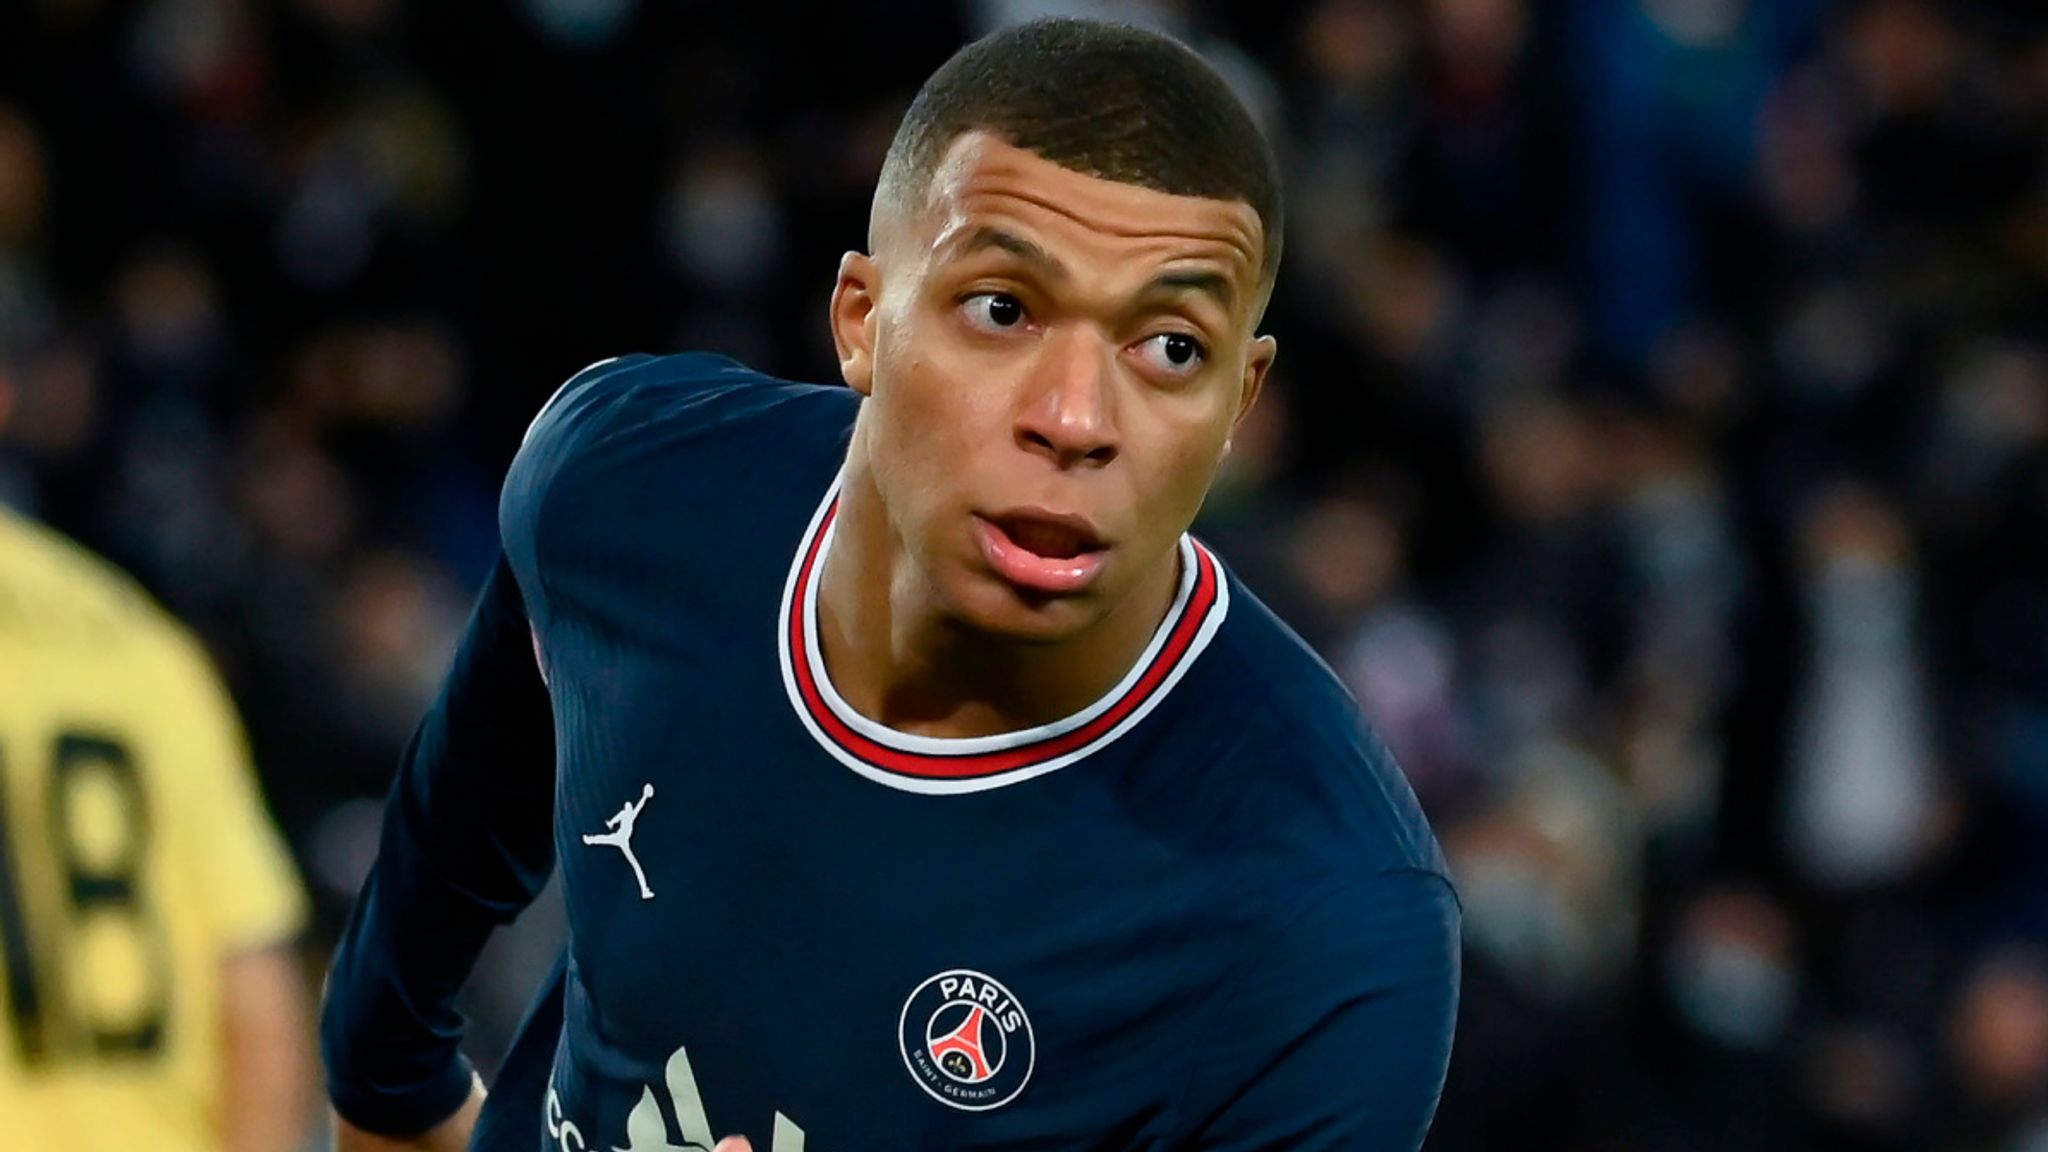  PSG forward expected to announce decision to join Real  Madrid soon | Football News | Sky Sports